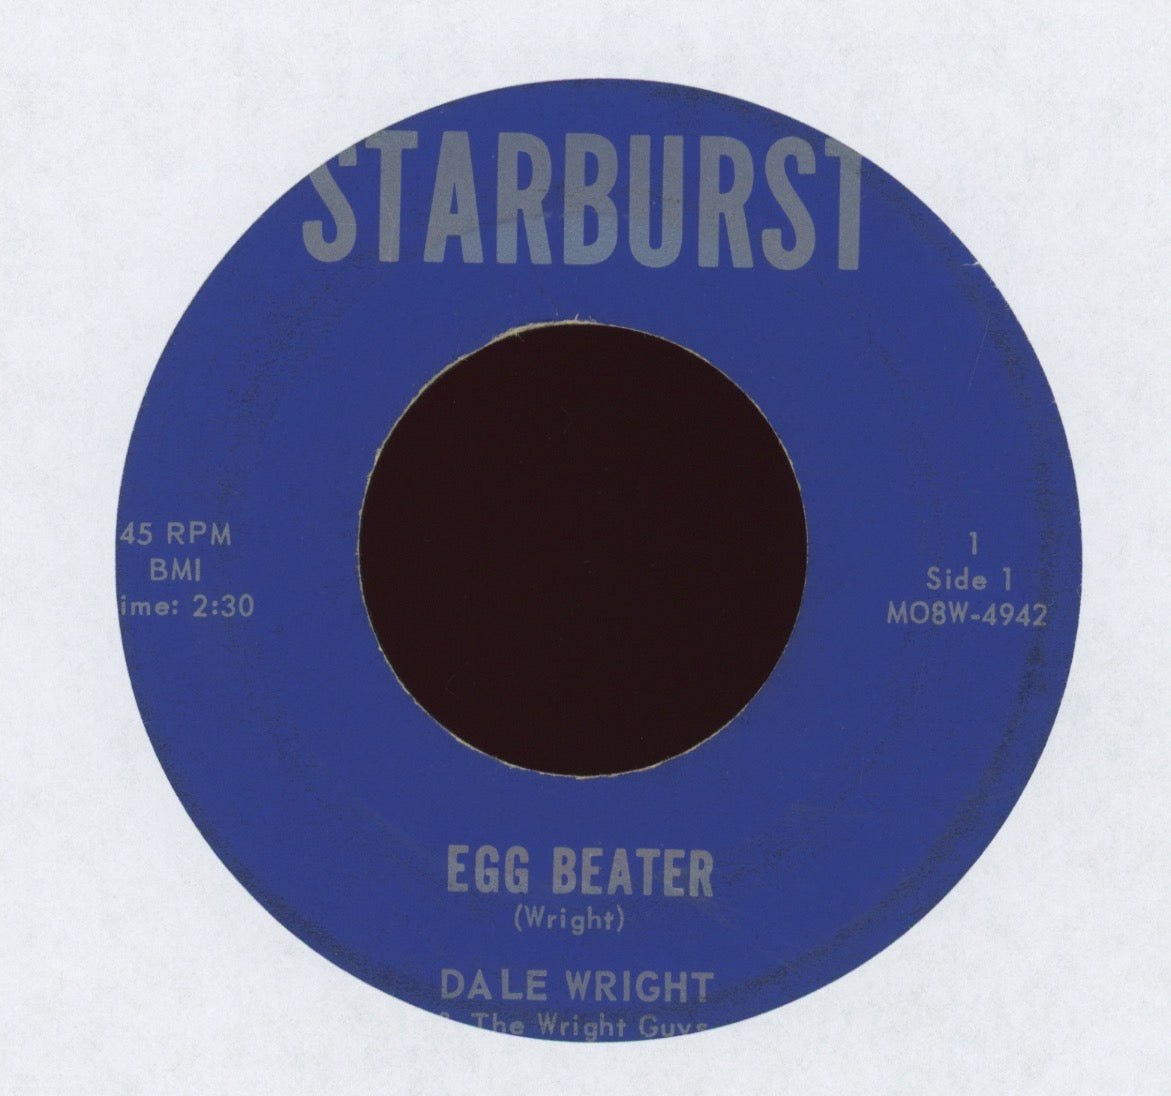 Dale Wright - Egg-Beater on Stardust Rockabilly 45